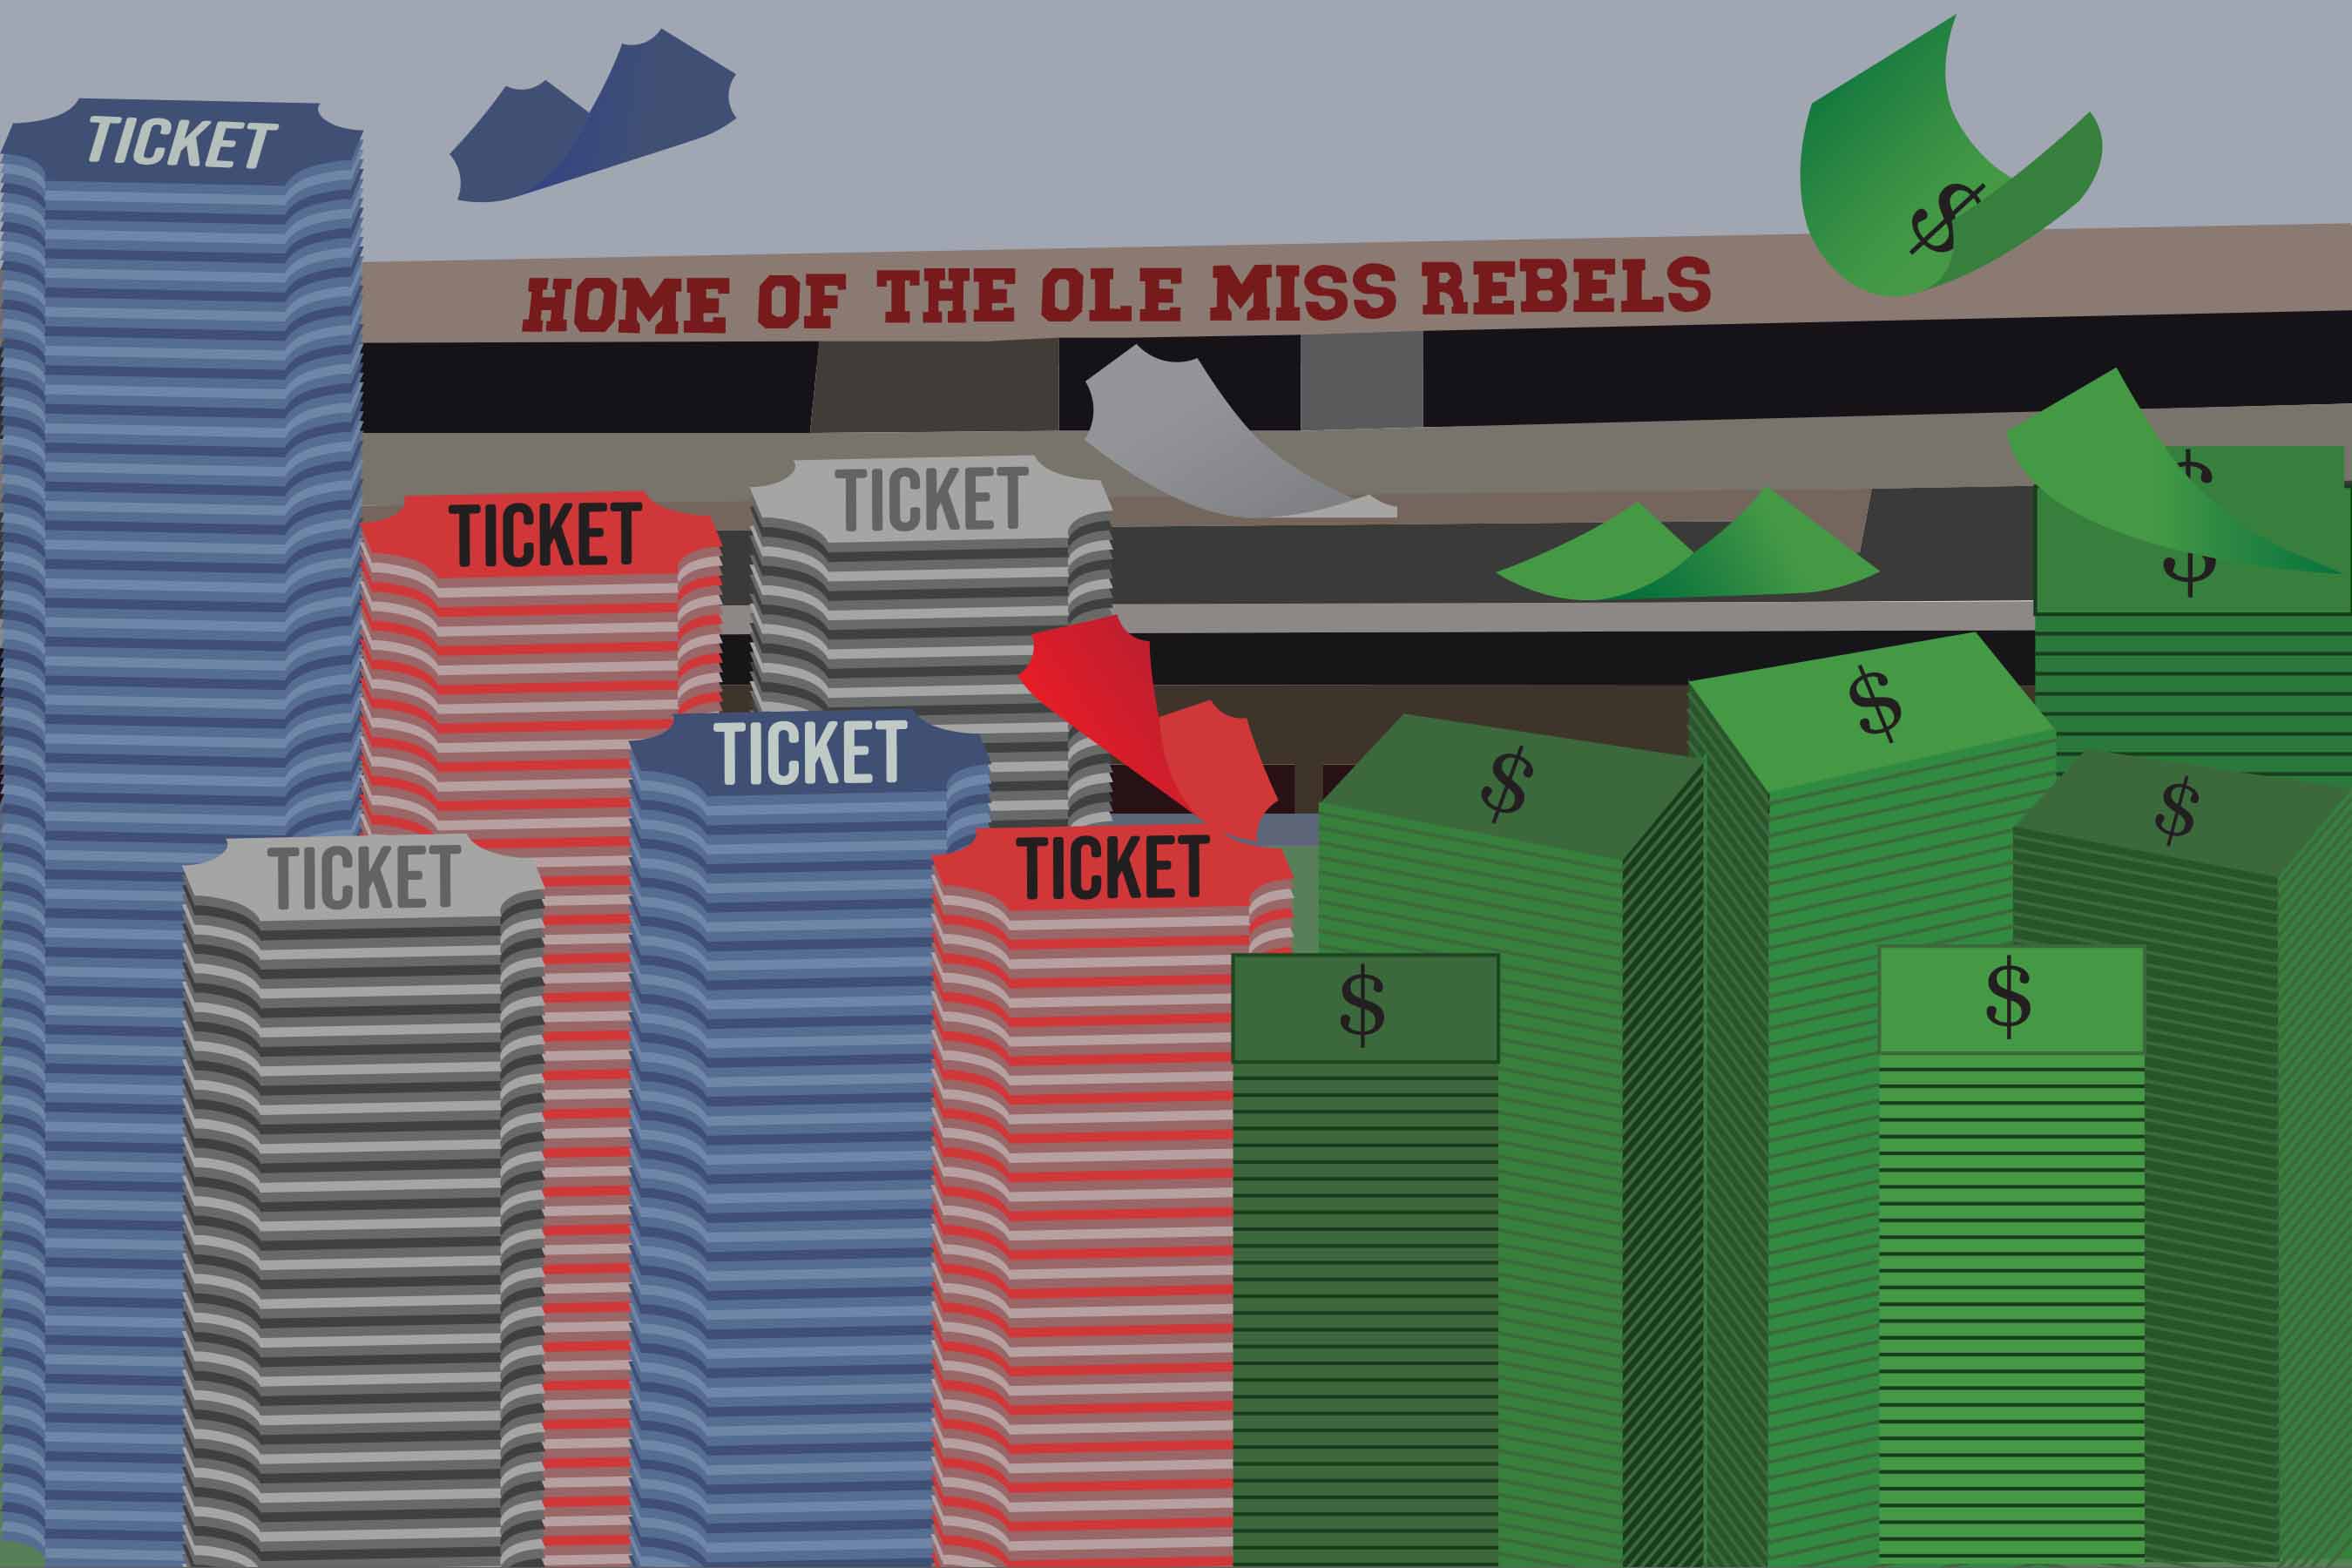 Ole Miss looks to shift as ticket sales continue to fall The Daily